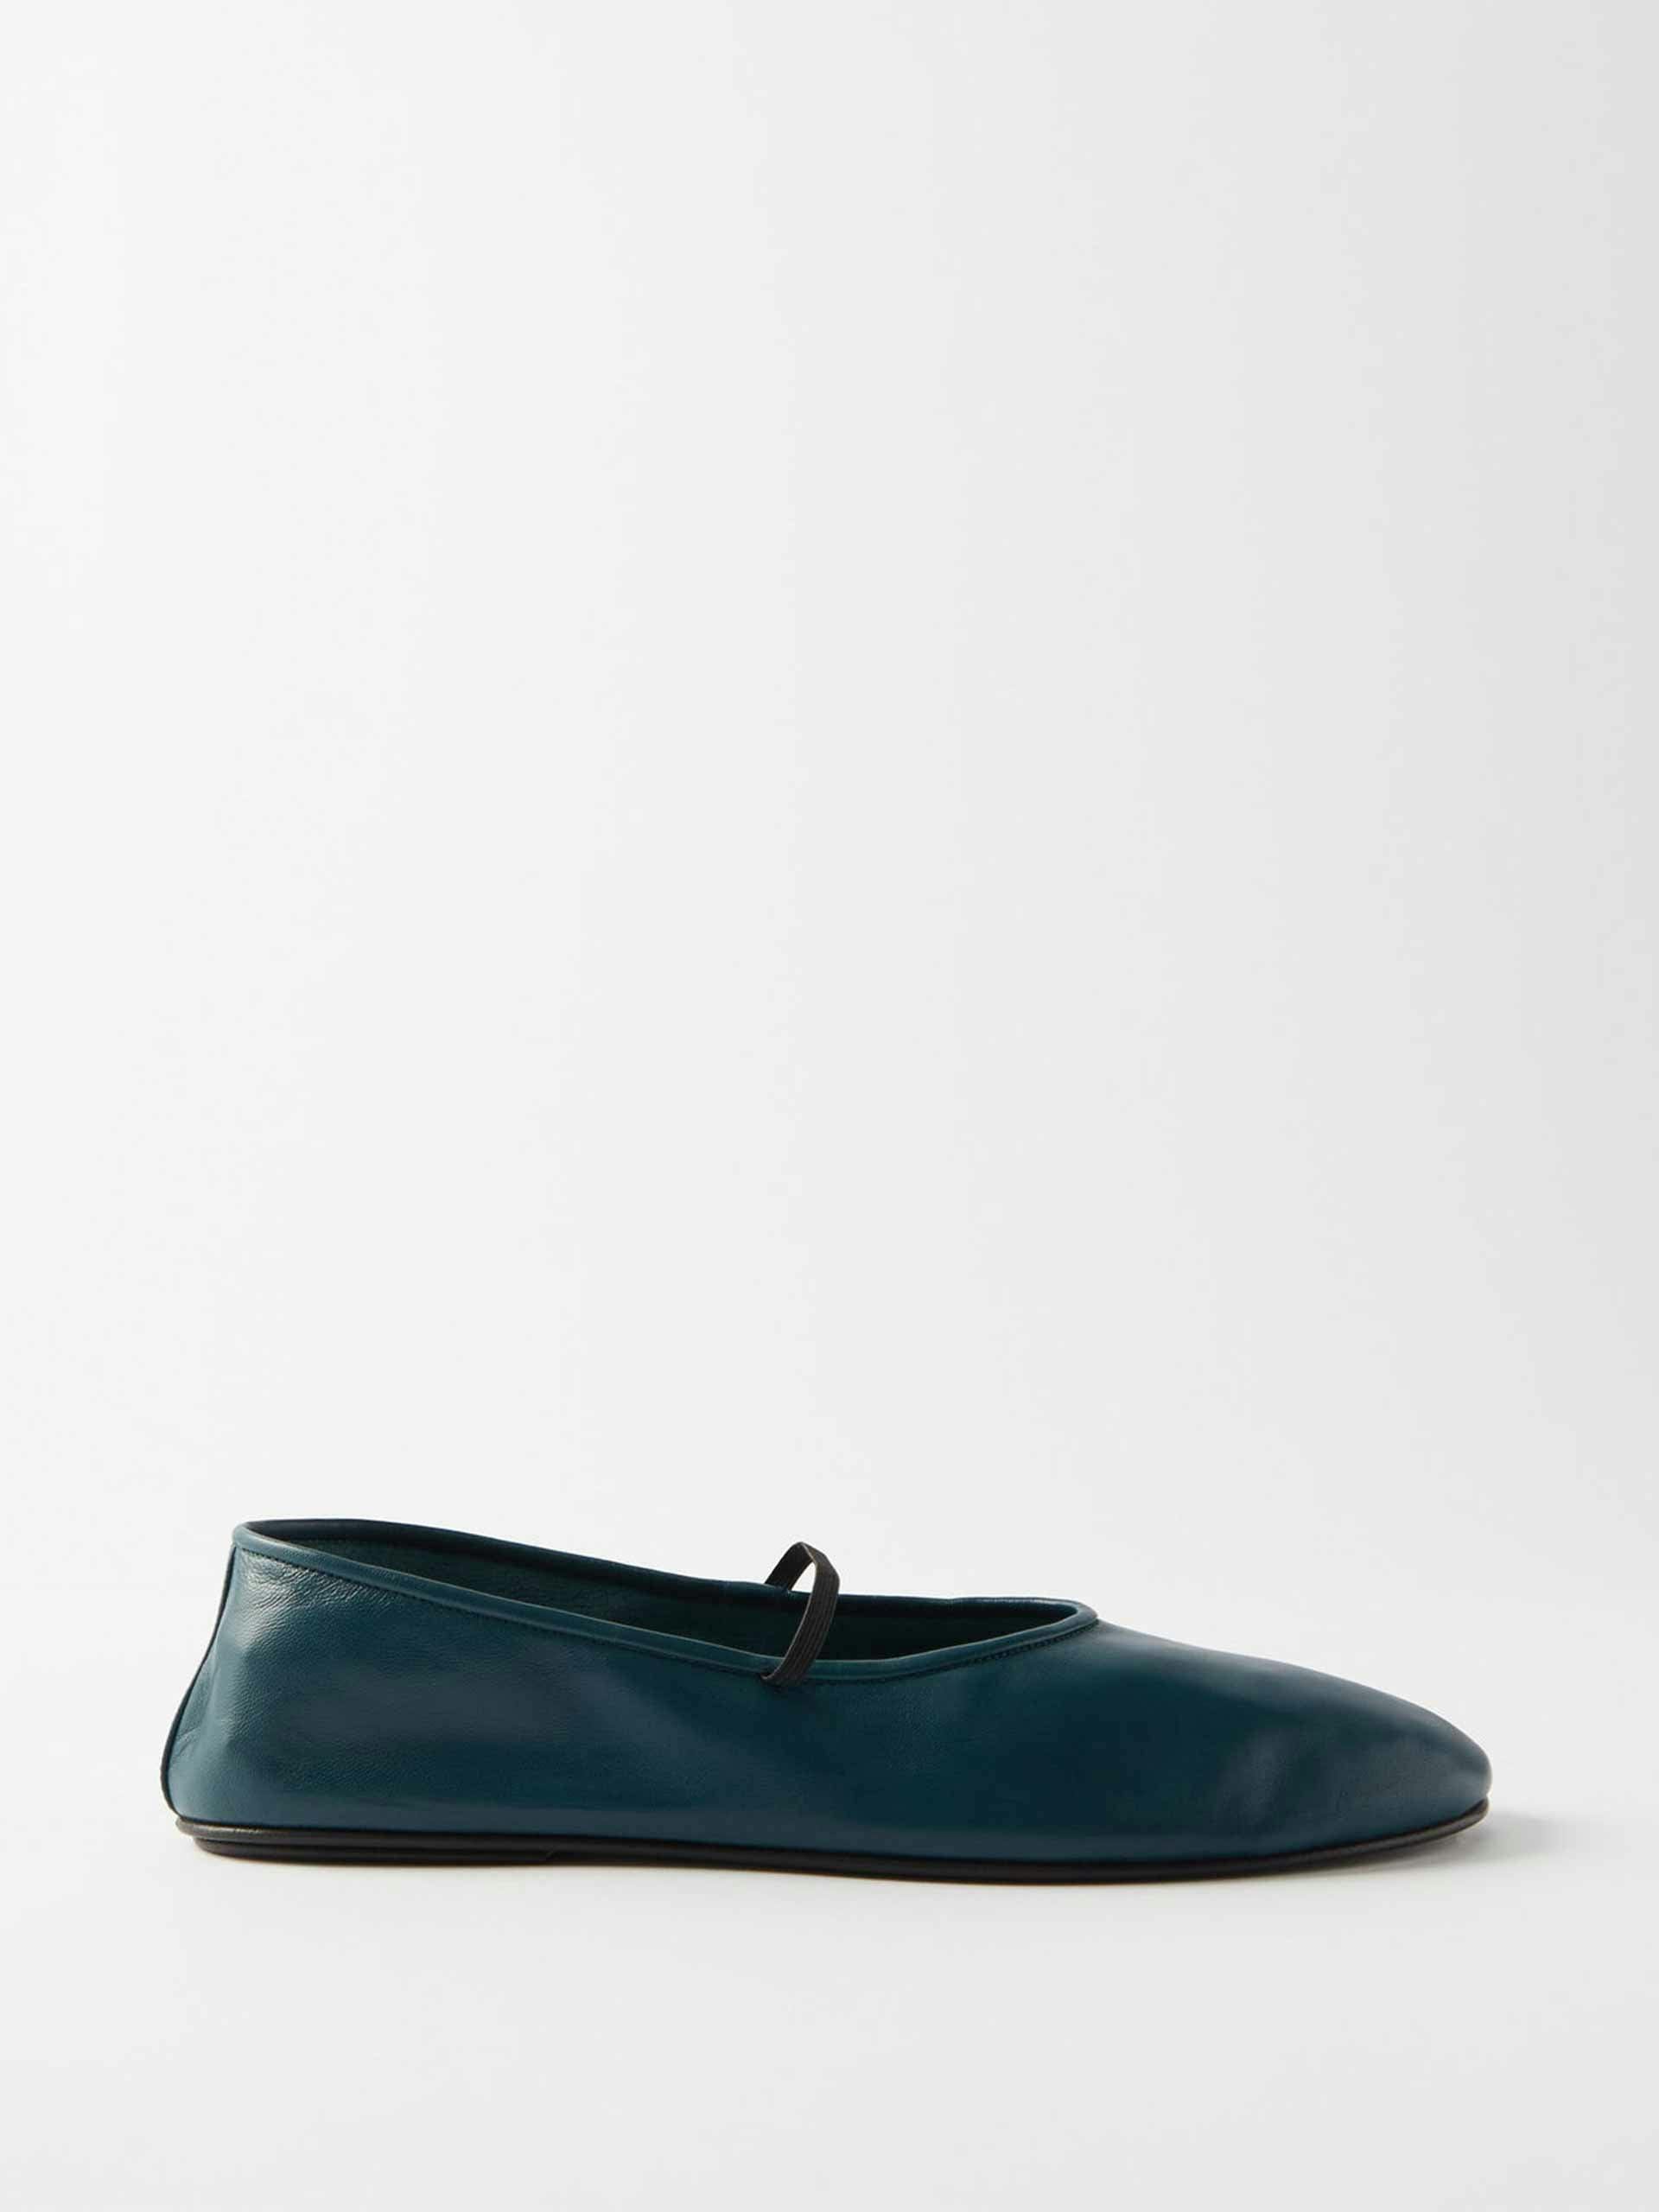 Round toe green leather flats